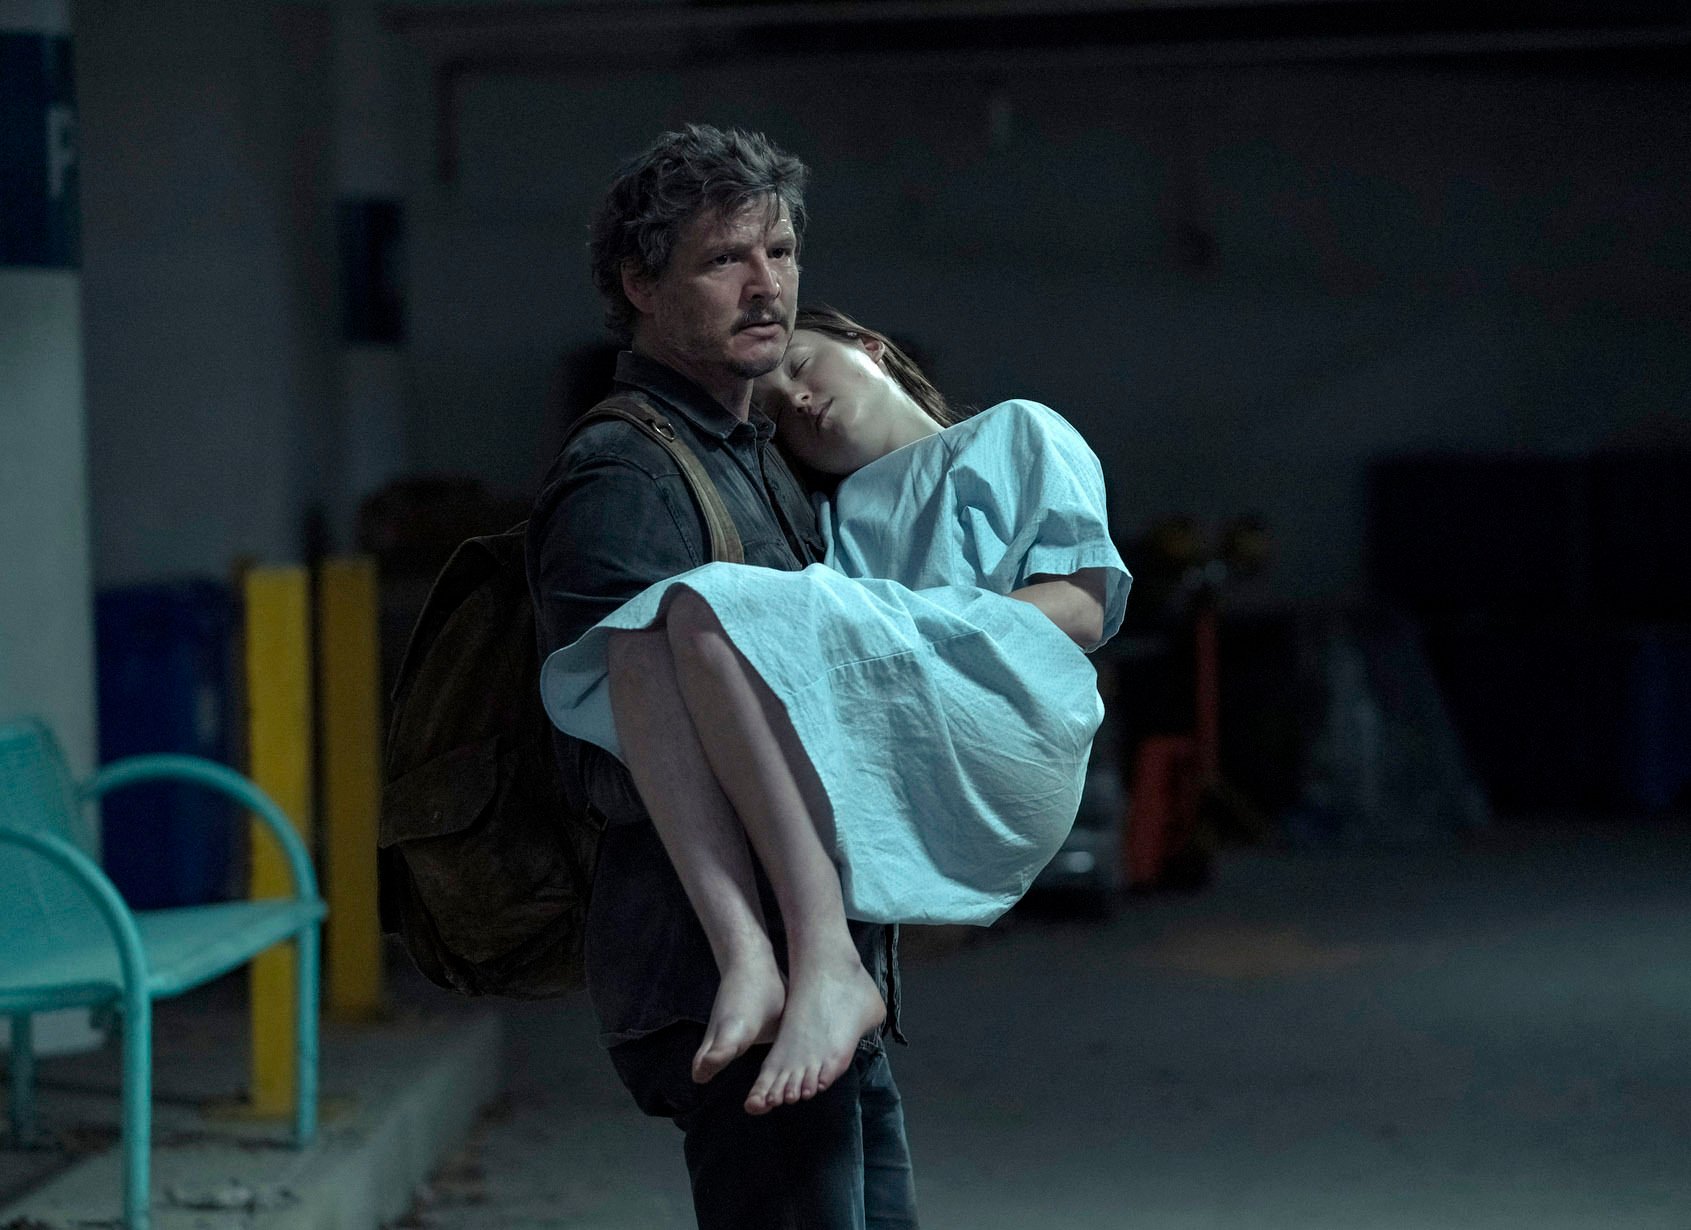 Pedro Pascal and Bella Ramsey in a scene from The Last of Us, the TV adaptation of the popular video game. Photo: AP